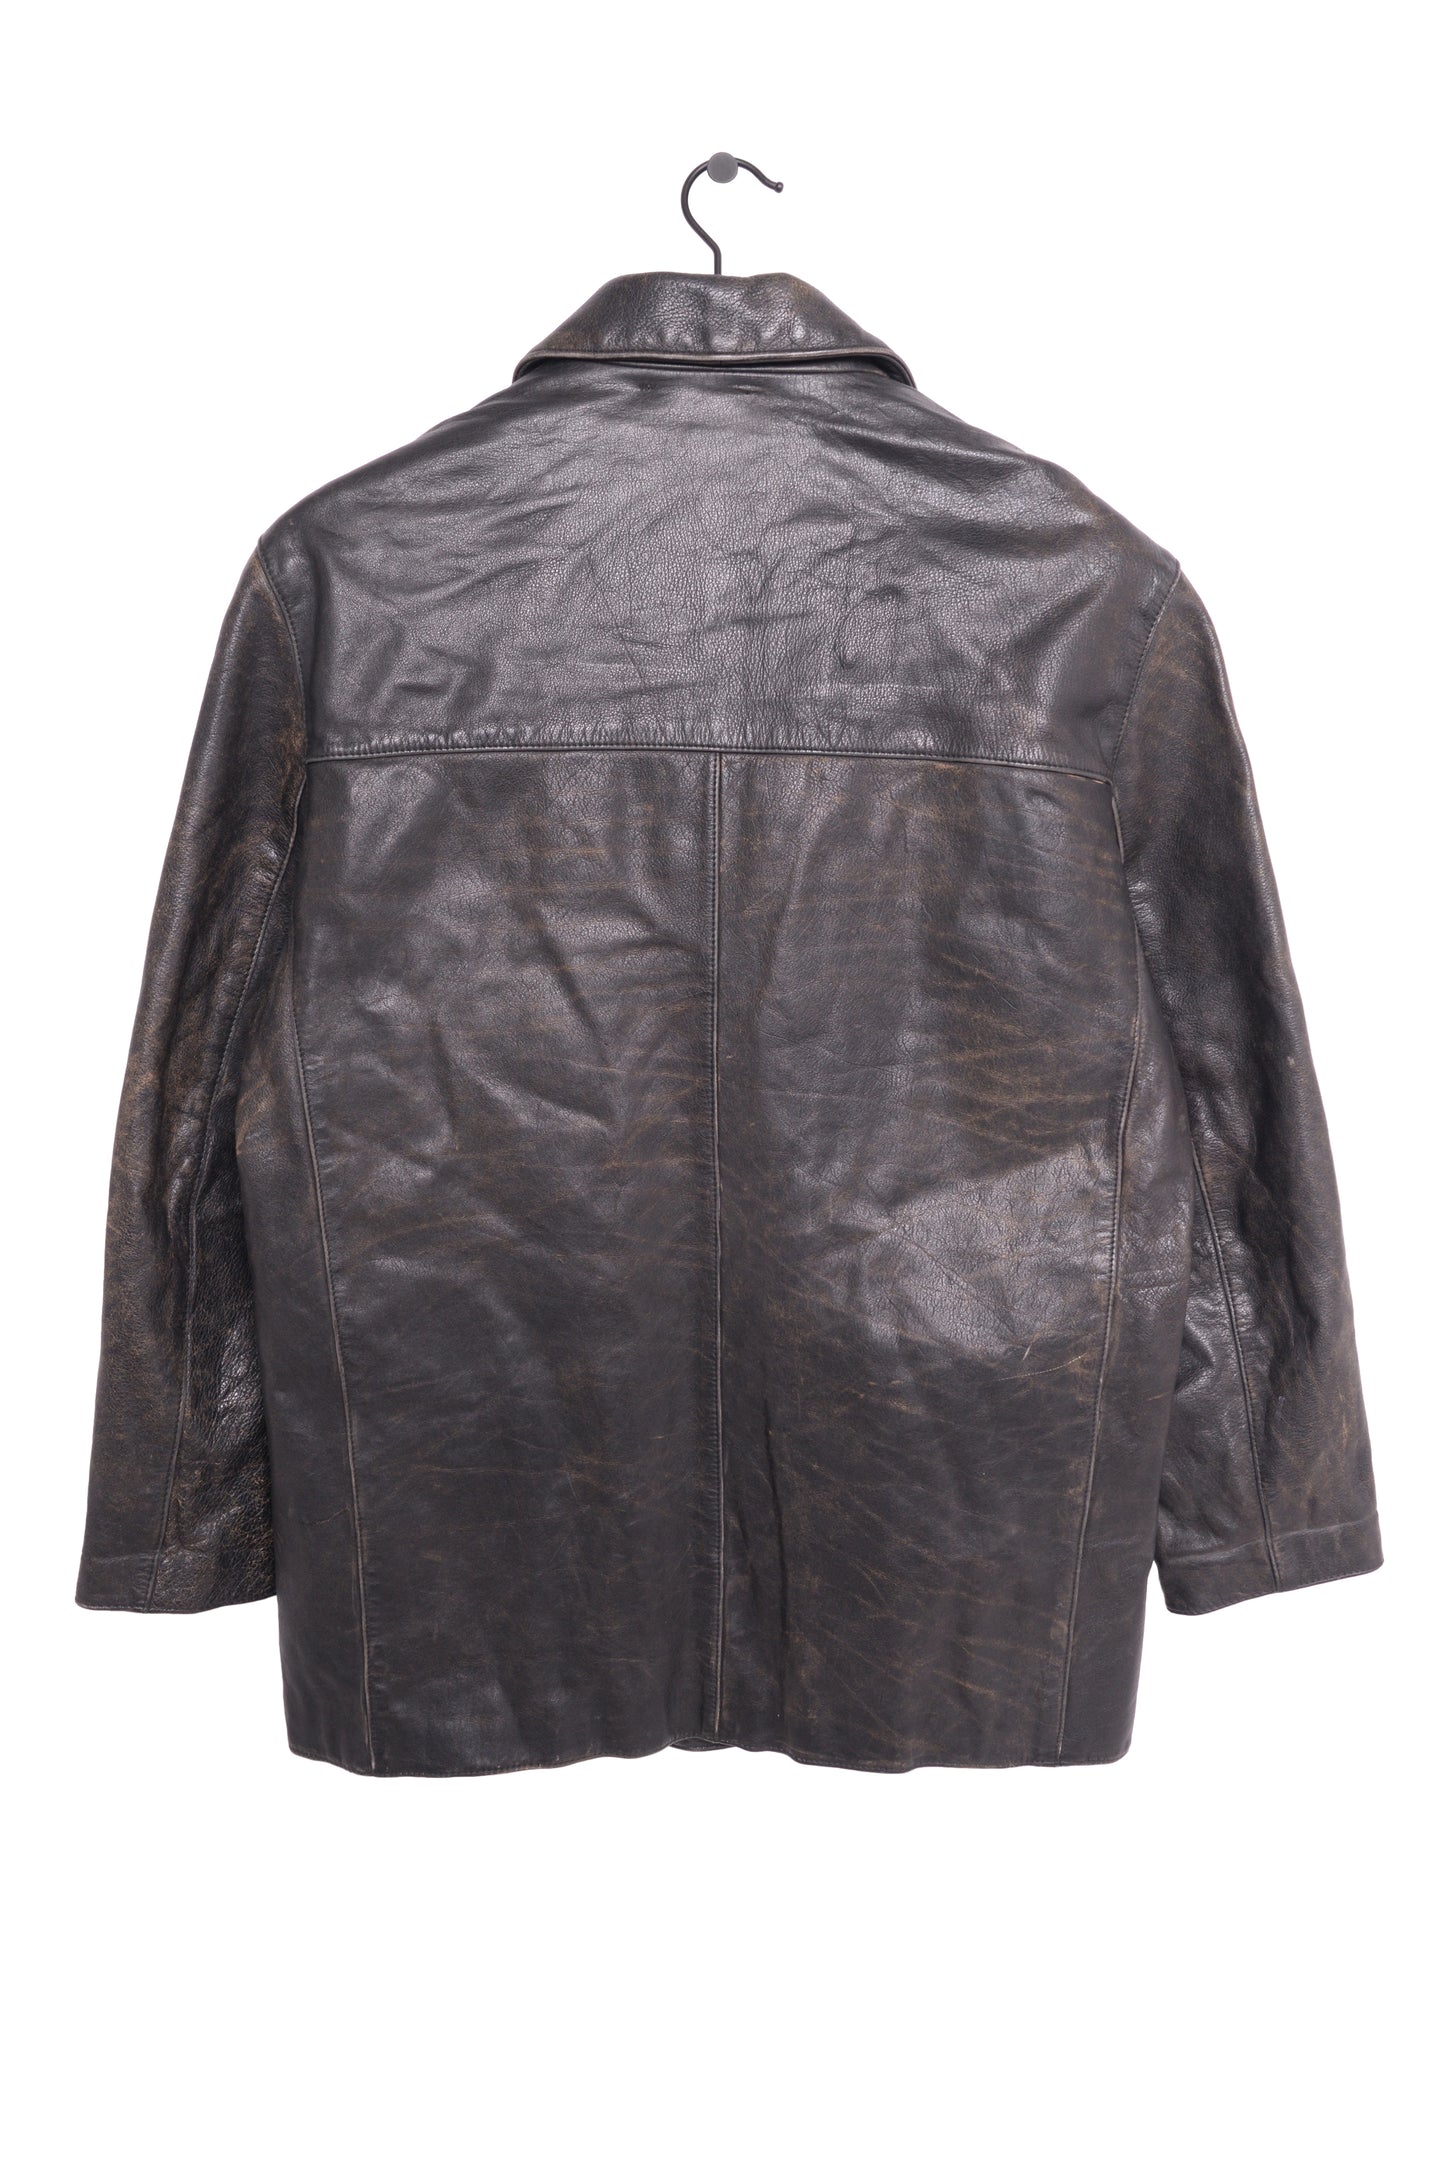 1990s Faded Leather Jacket